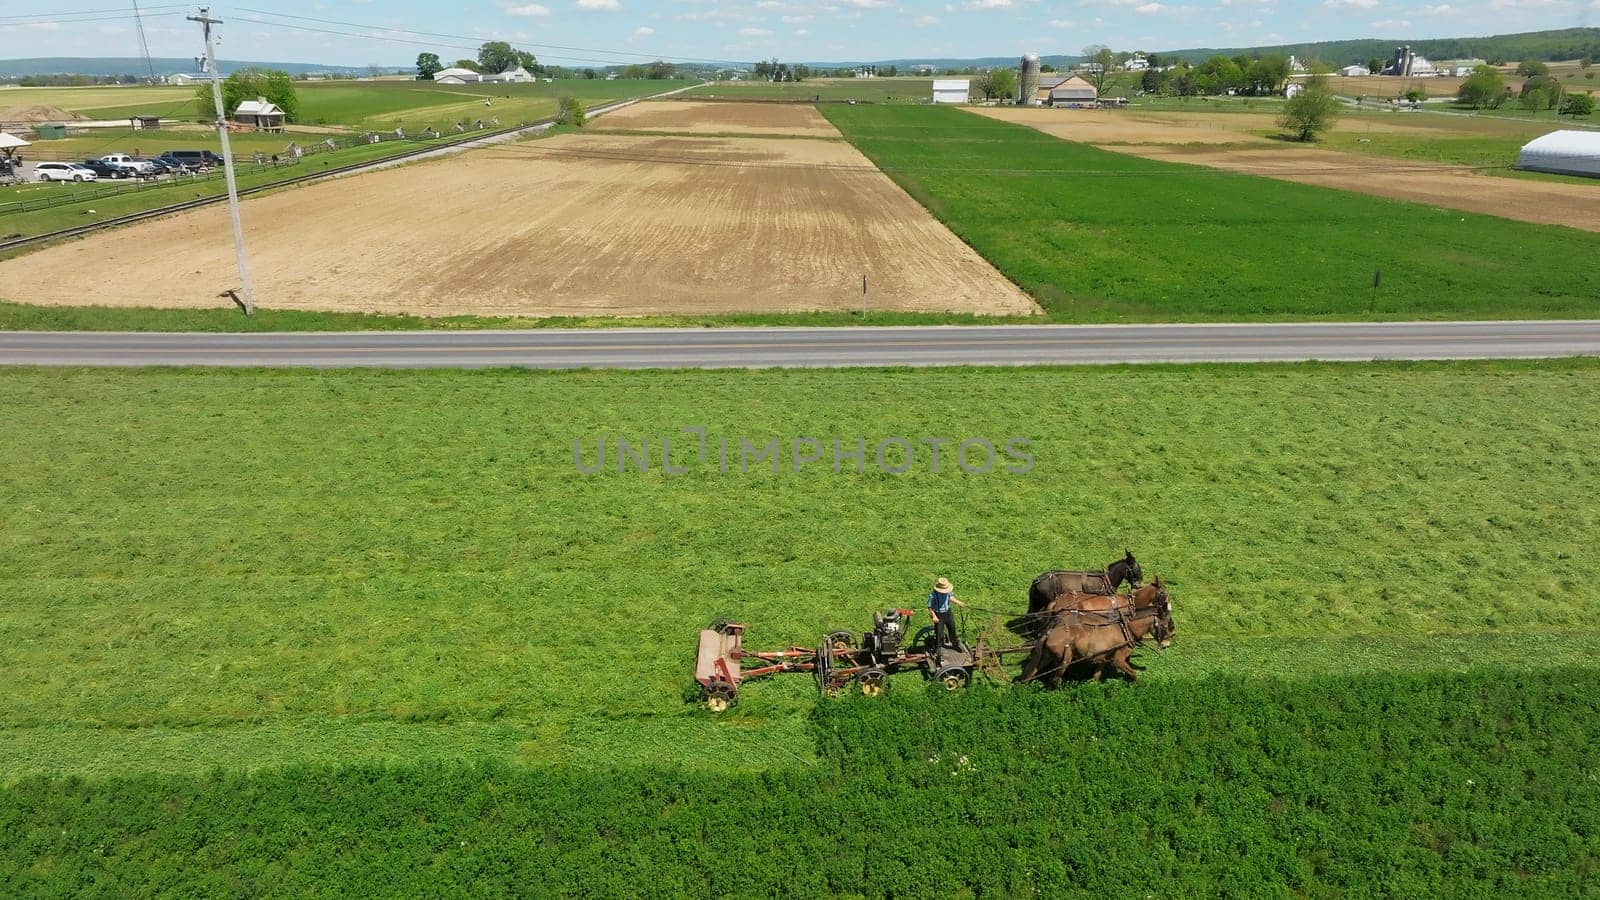 An Aerial View of an Amish Farmer Cutting Mowing Crops Using Four Horses and a Gas Engine With his Barn and Farm House in View, on a Beautiful Summer Day